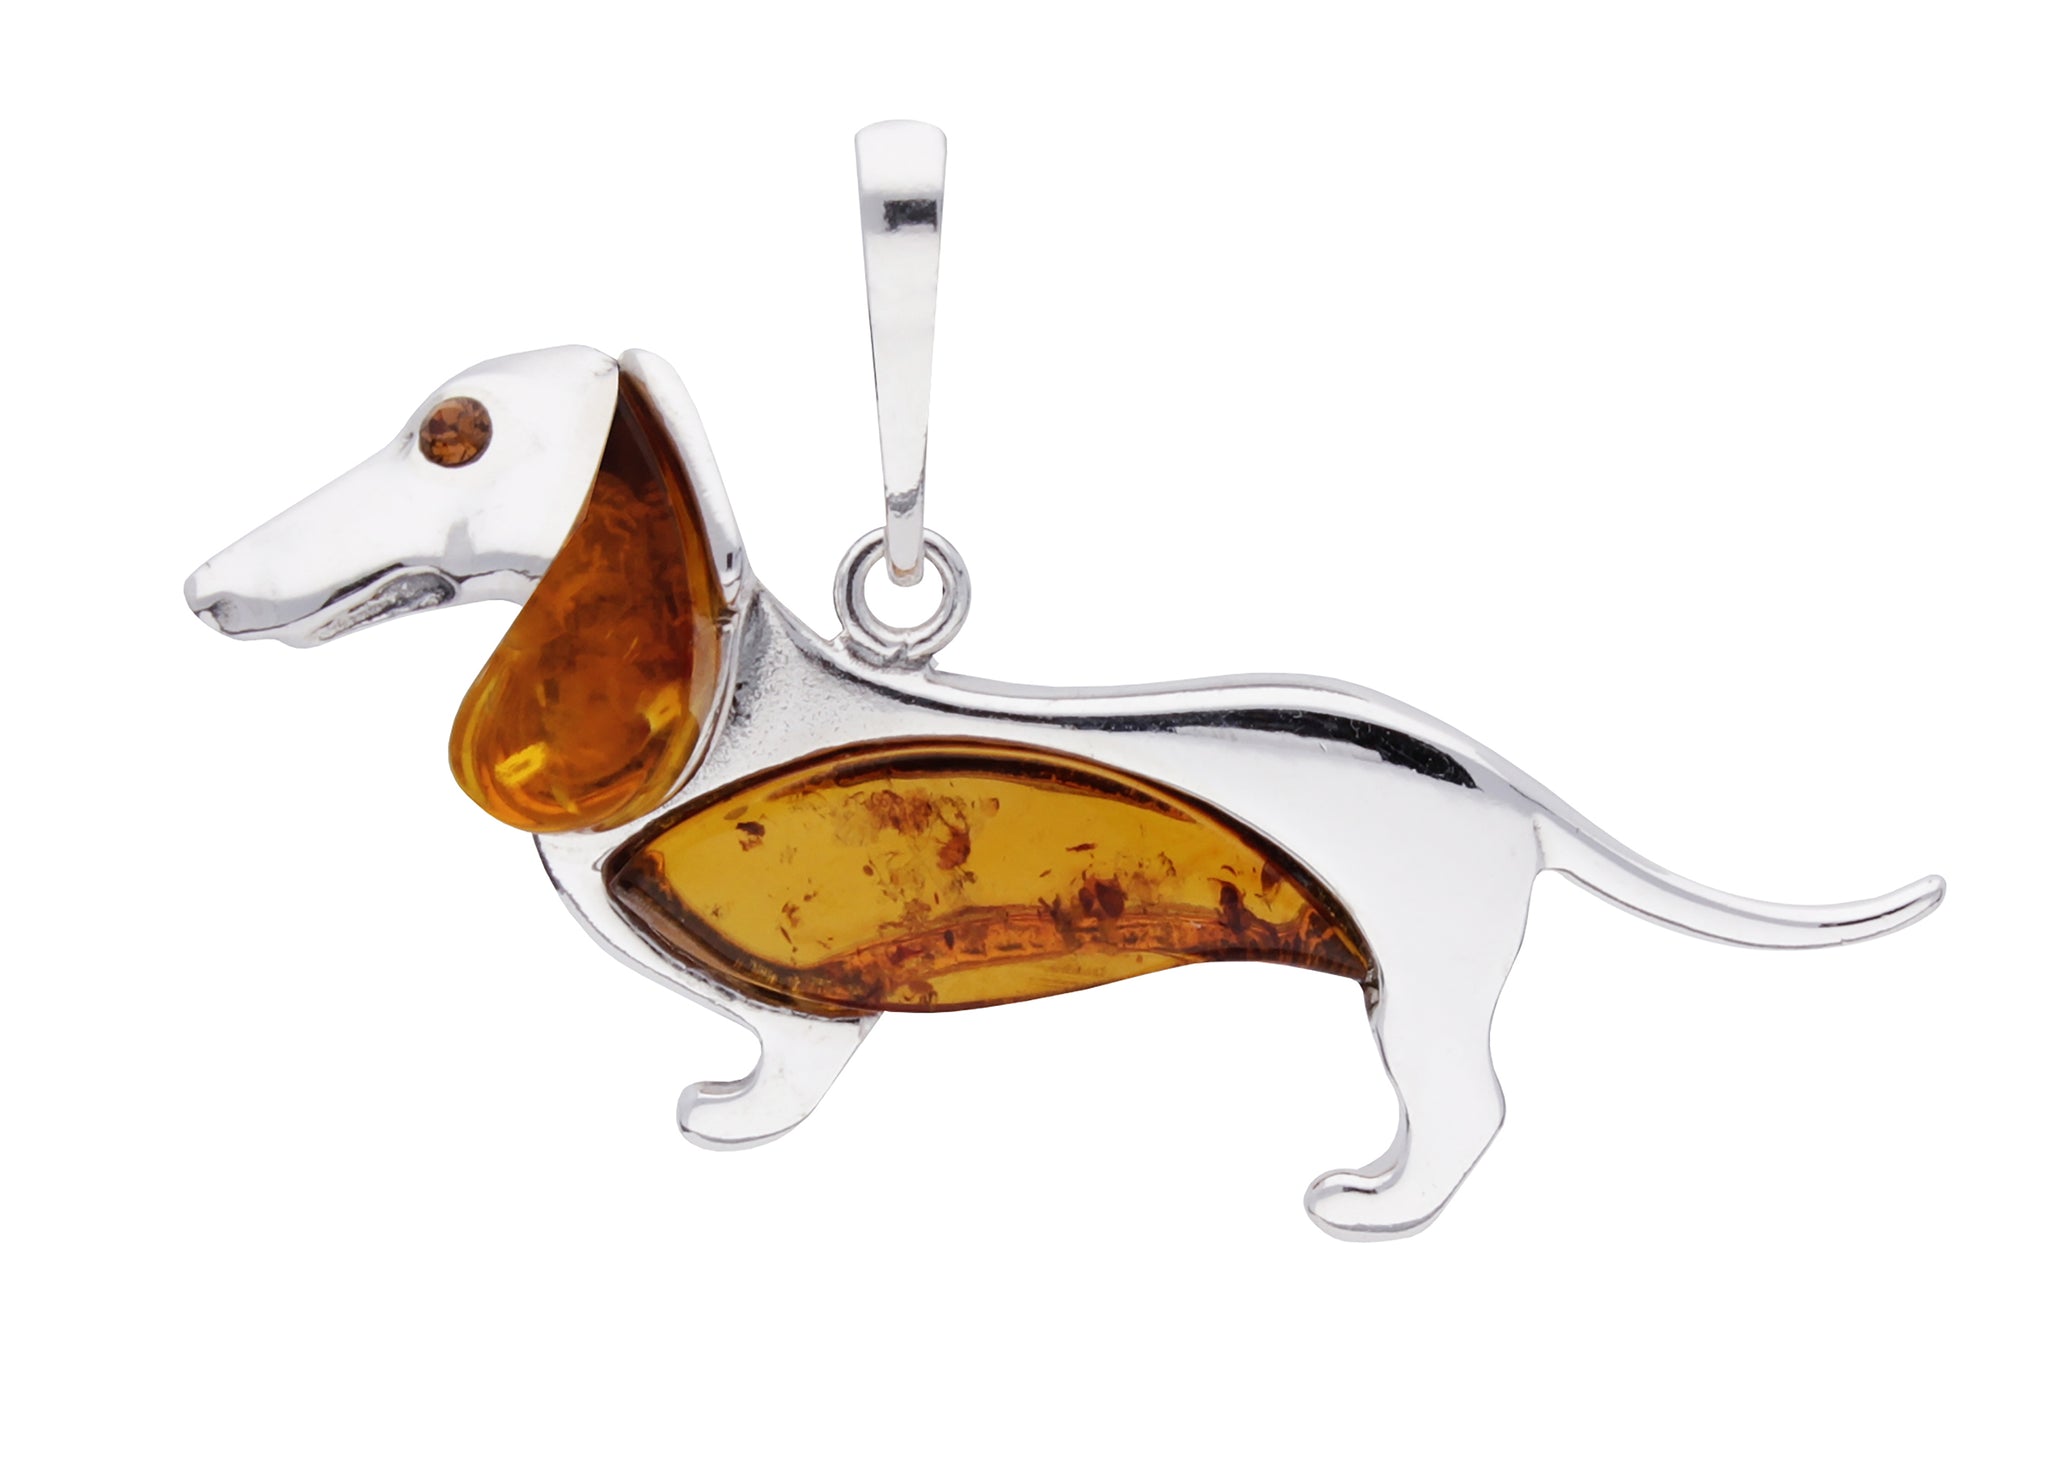 Genuine Baltic Amber Dachshund Dog Pendent - 925 Sterling Silver